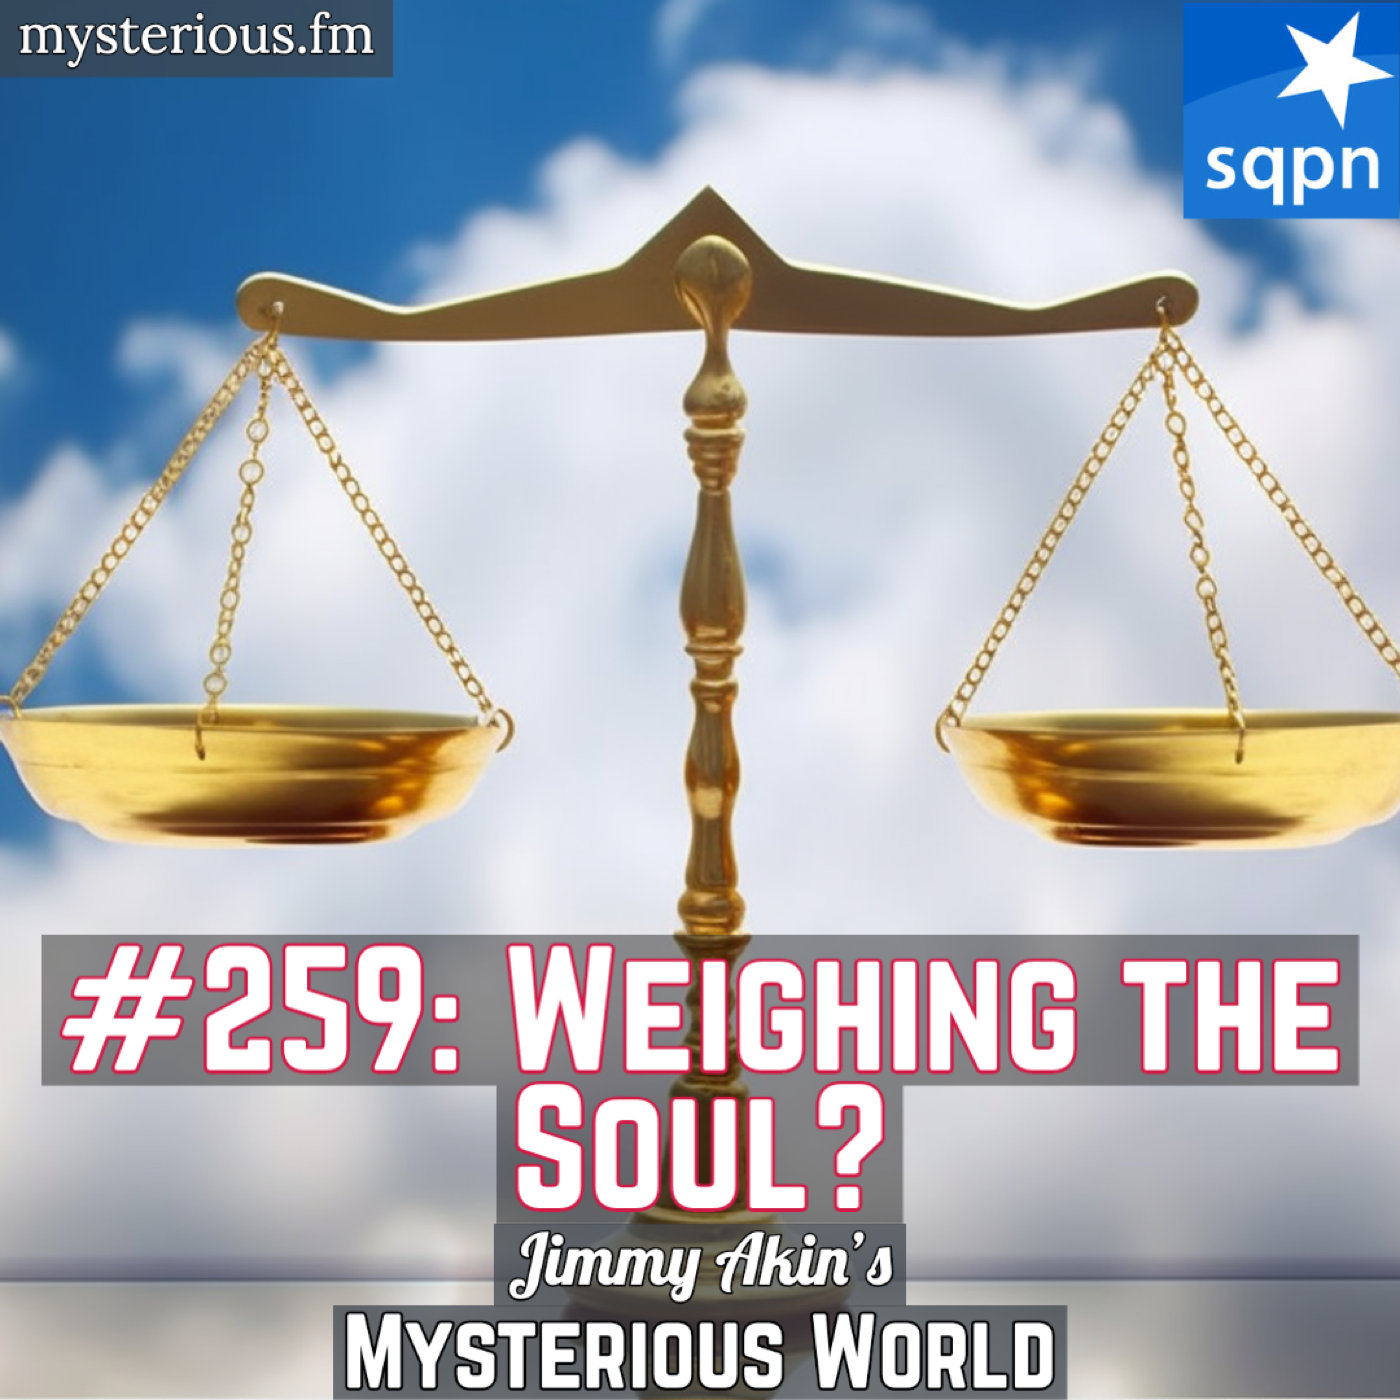 Weighing the Soul? (Scientific evidence for the human soul? Spirit? Life after death?)